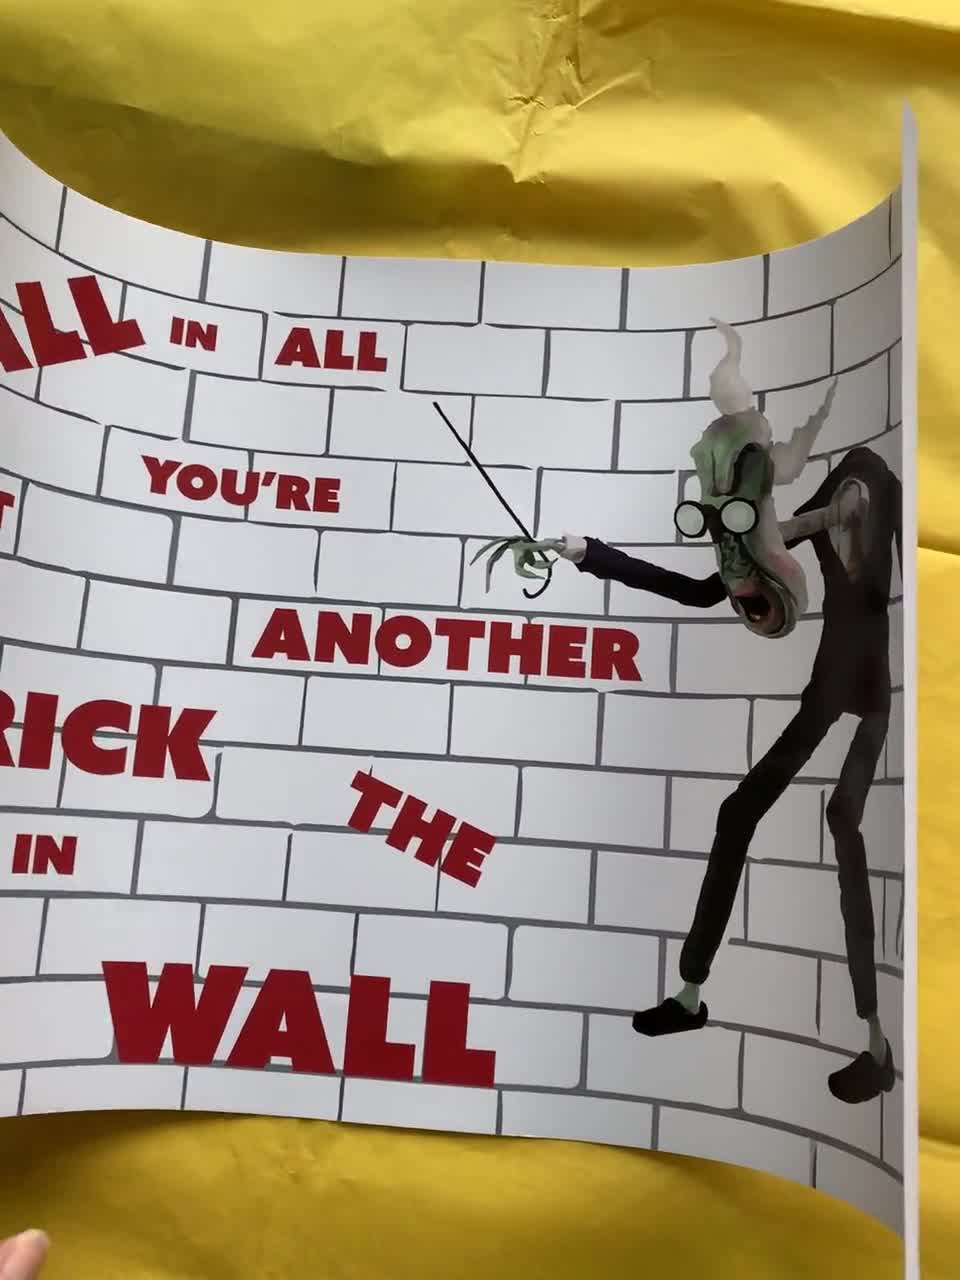 Pink Floyd the Wall Another Brick in the Wall Wall Art 